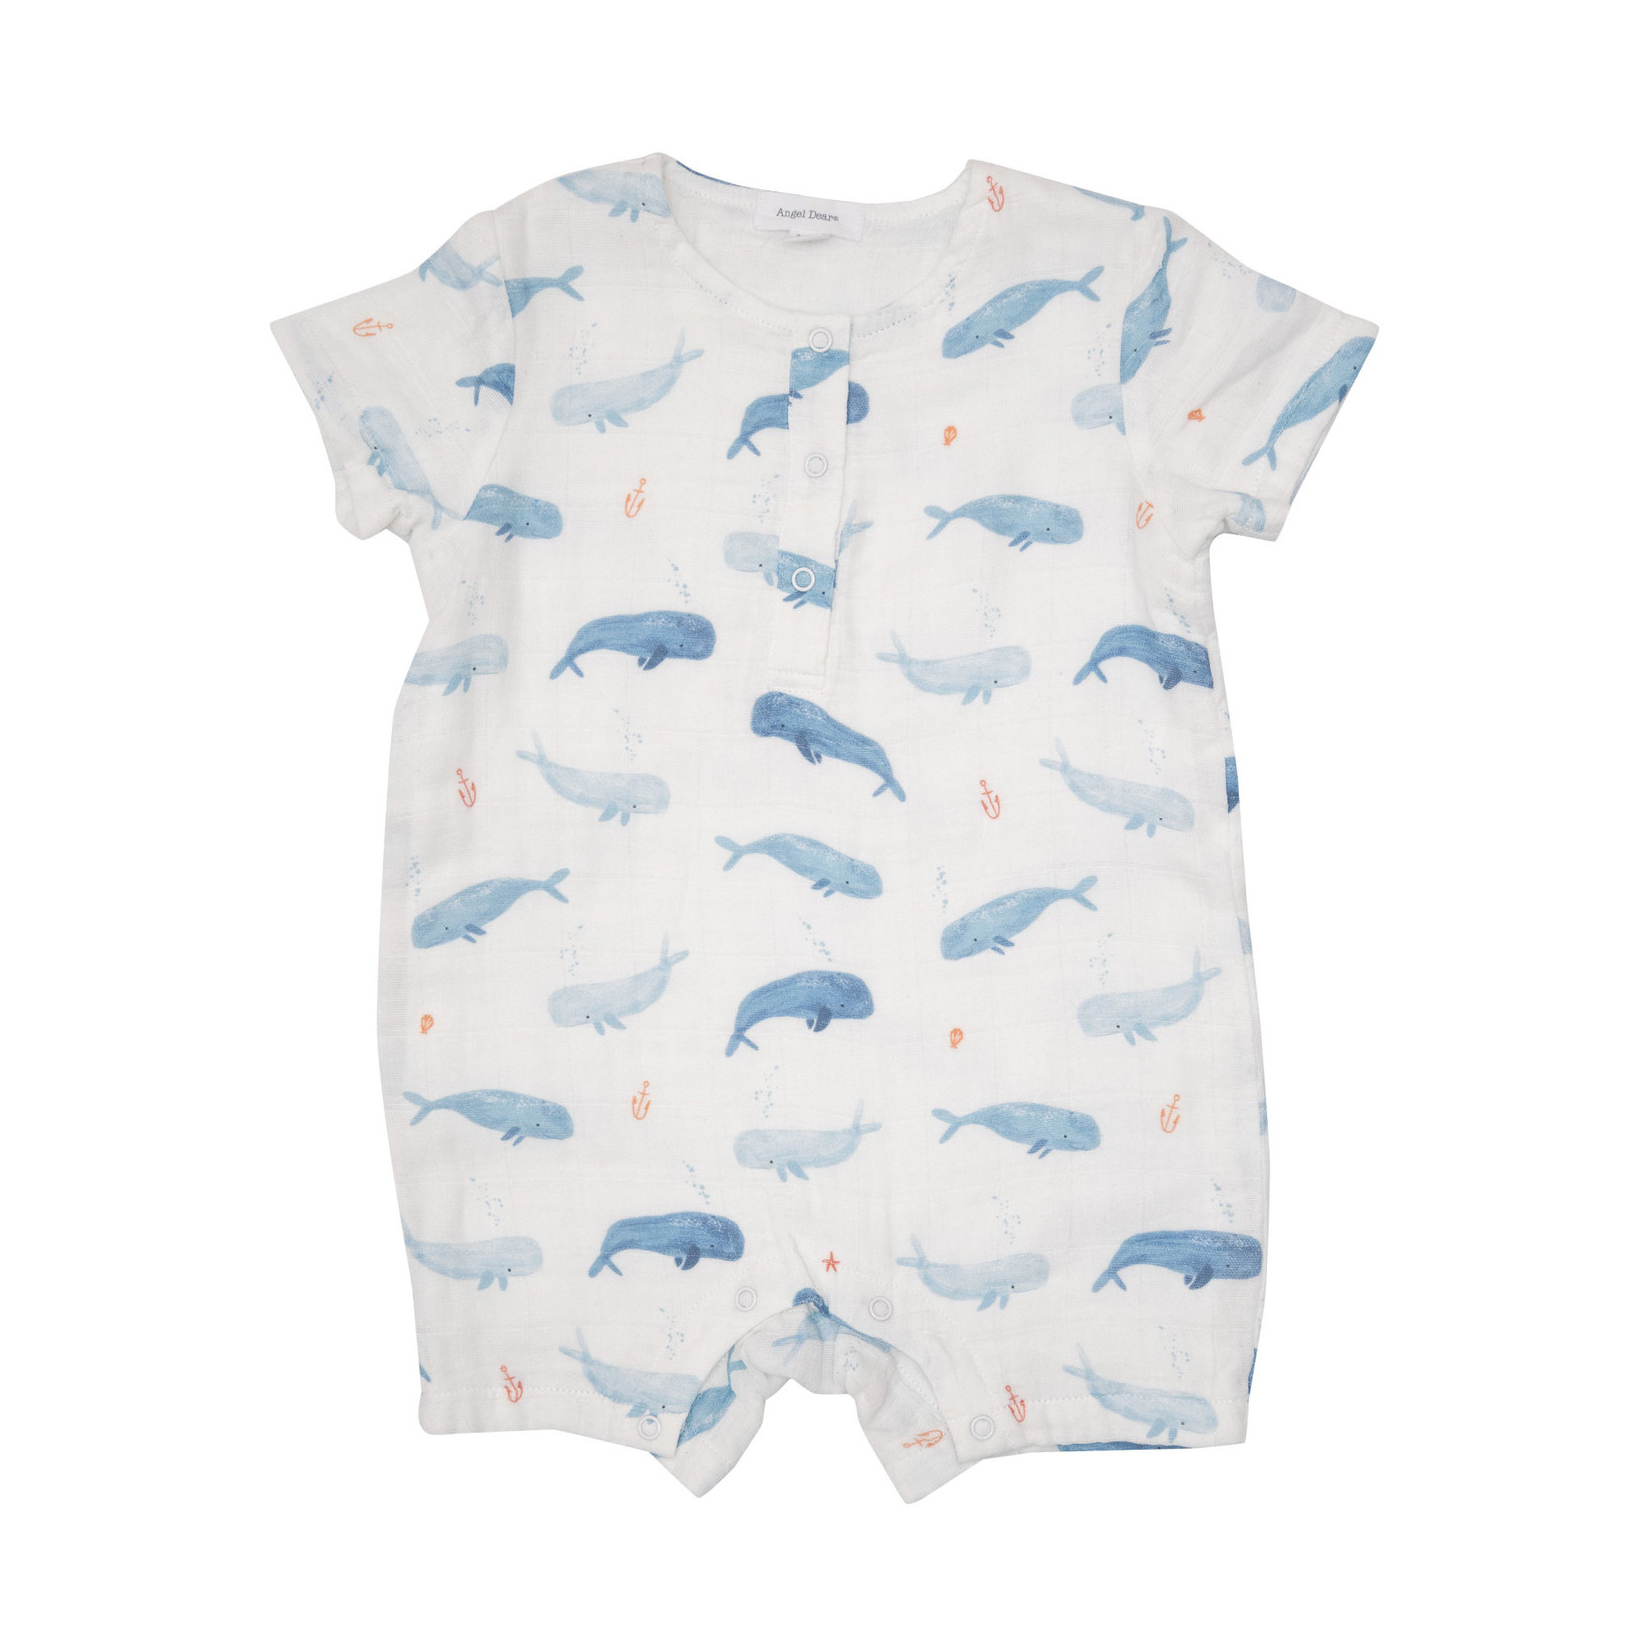 Whale Hello There muslin shortall 1